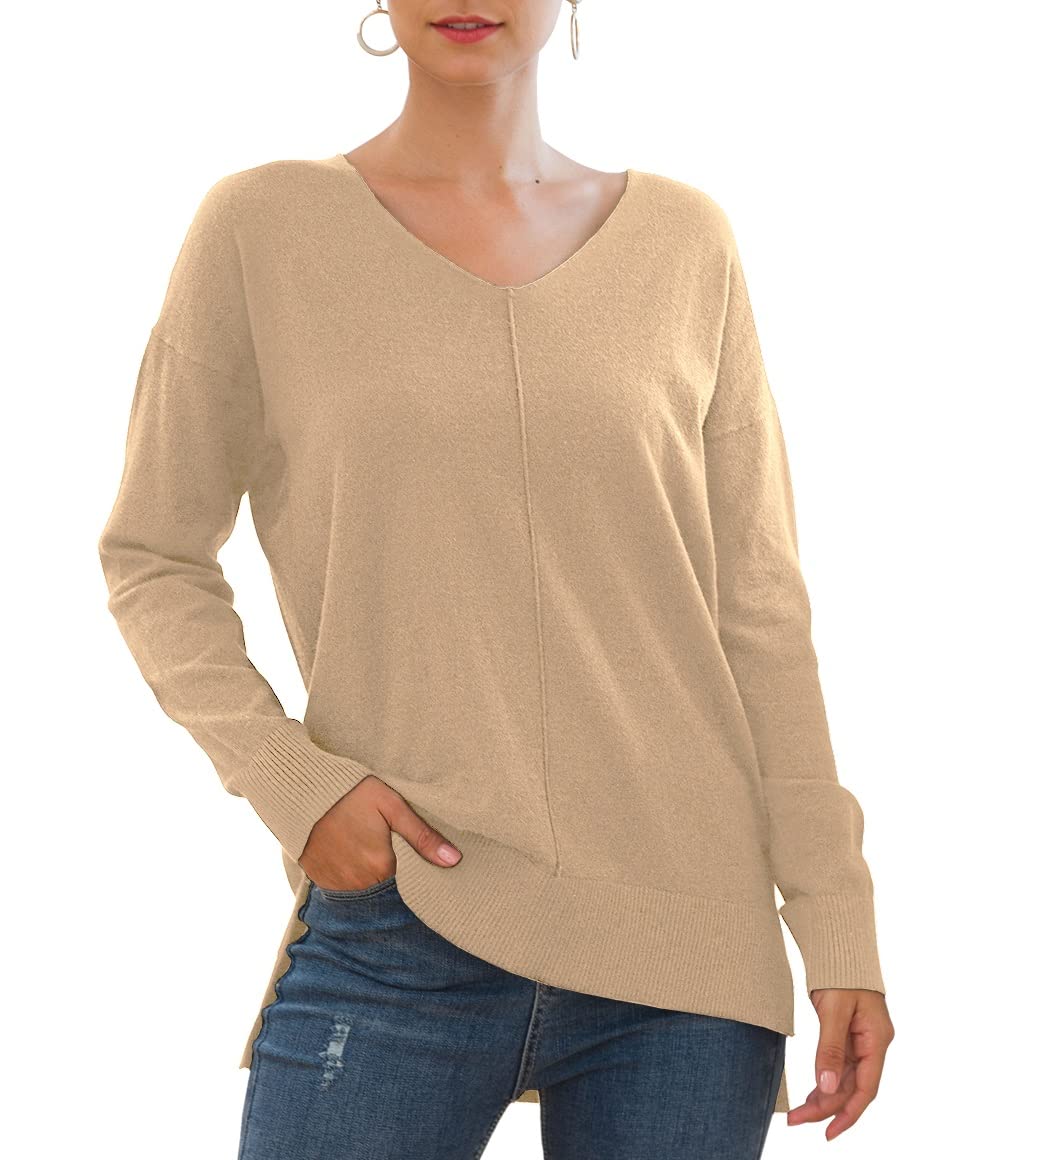 Aiyino Women's Casual Lightweight V Neck Batwing Sleeve Knit Top Loose Pullover Sweater